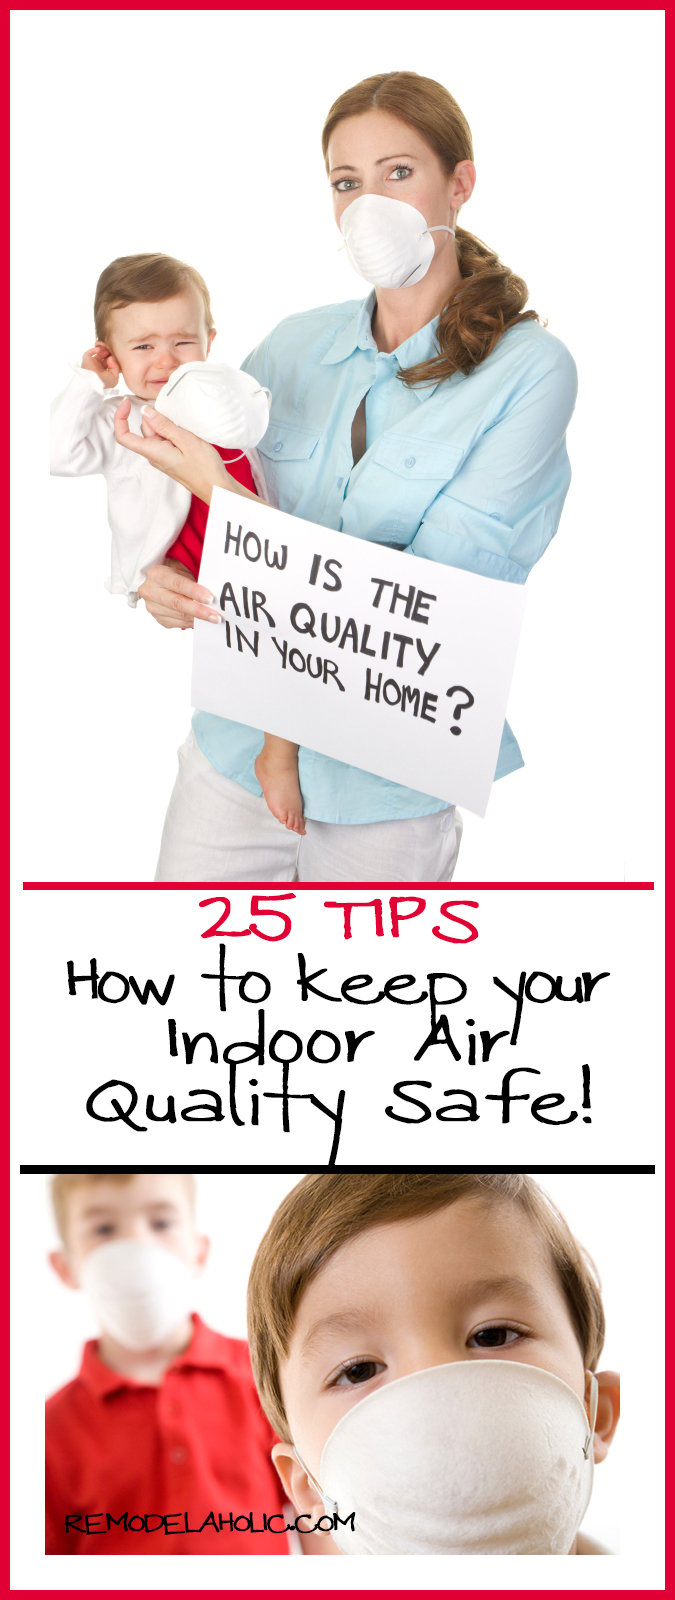 25 tips for cleaning you indoor air quality @remodelaholic